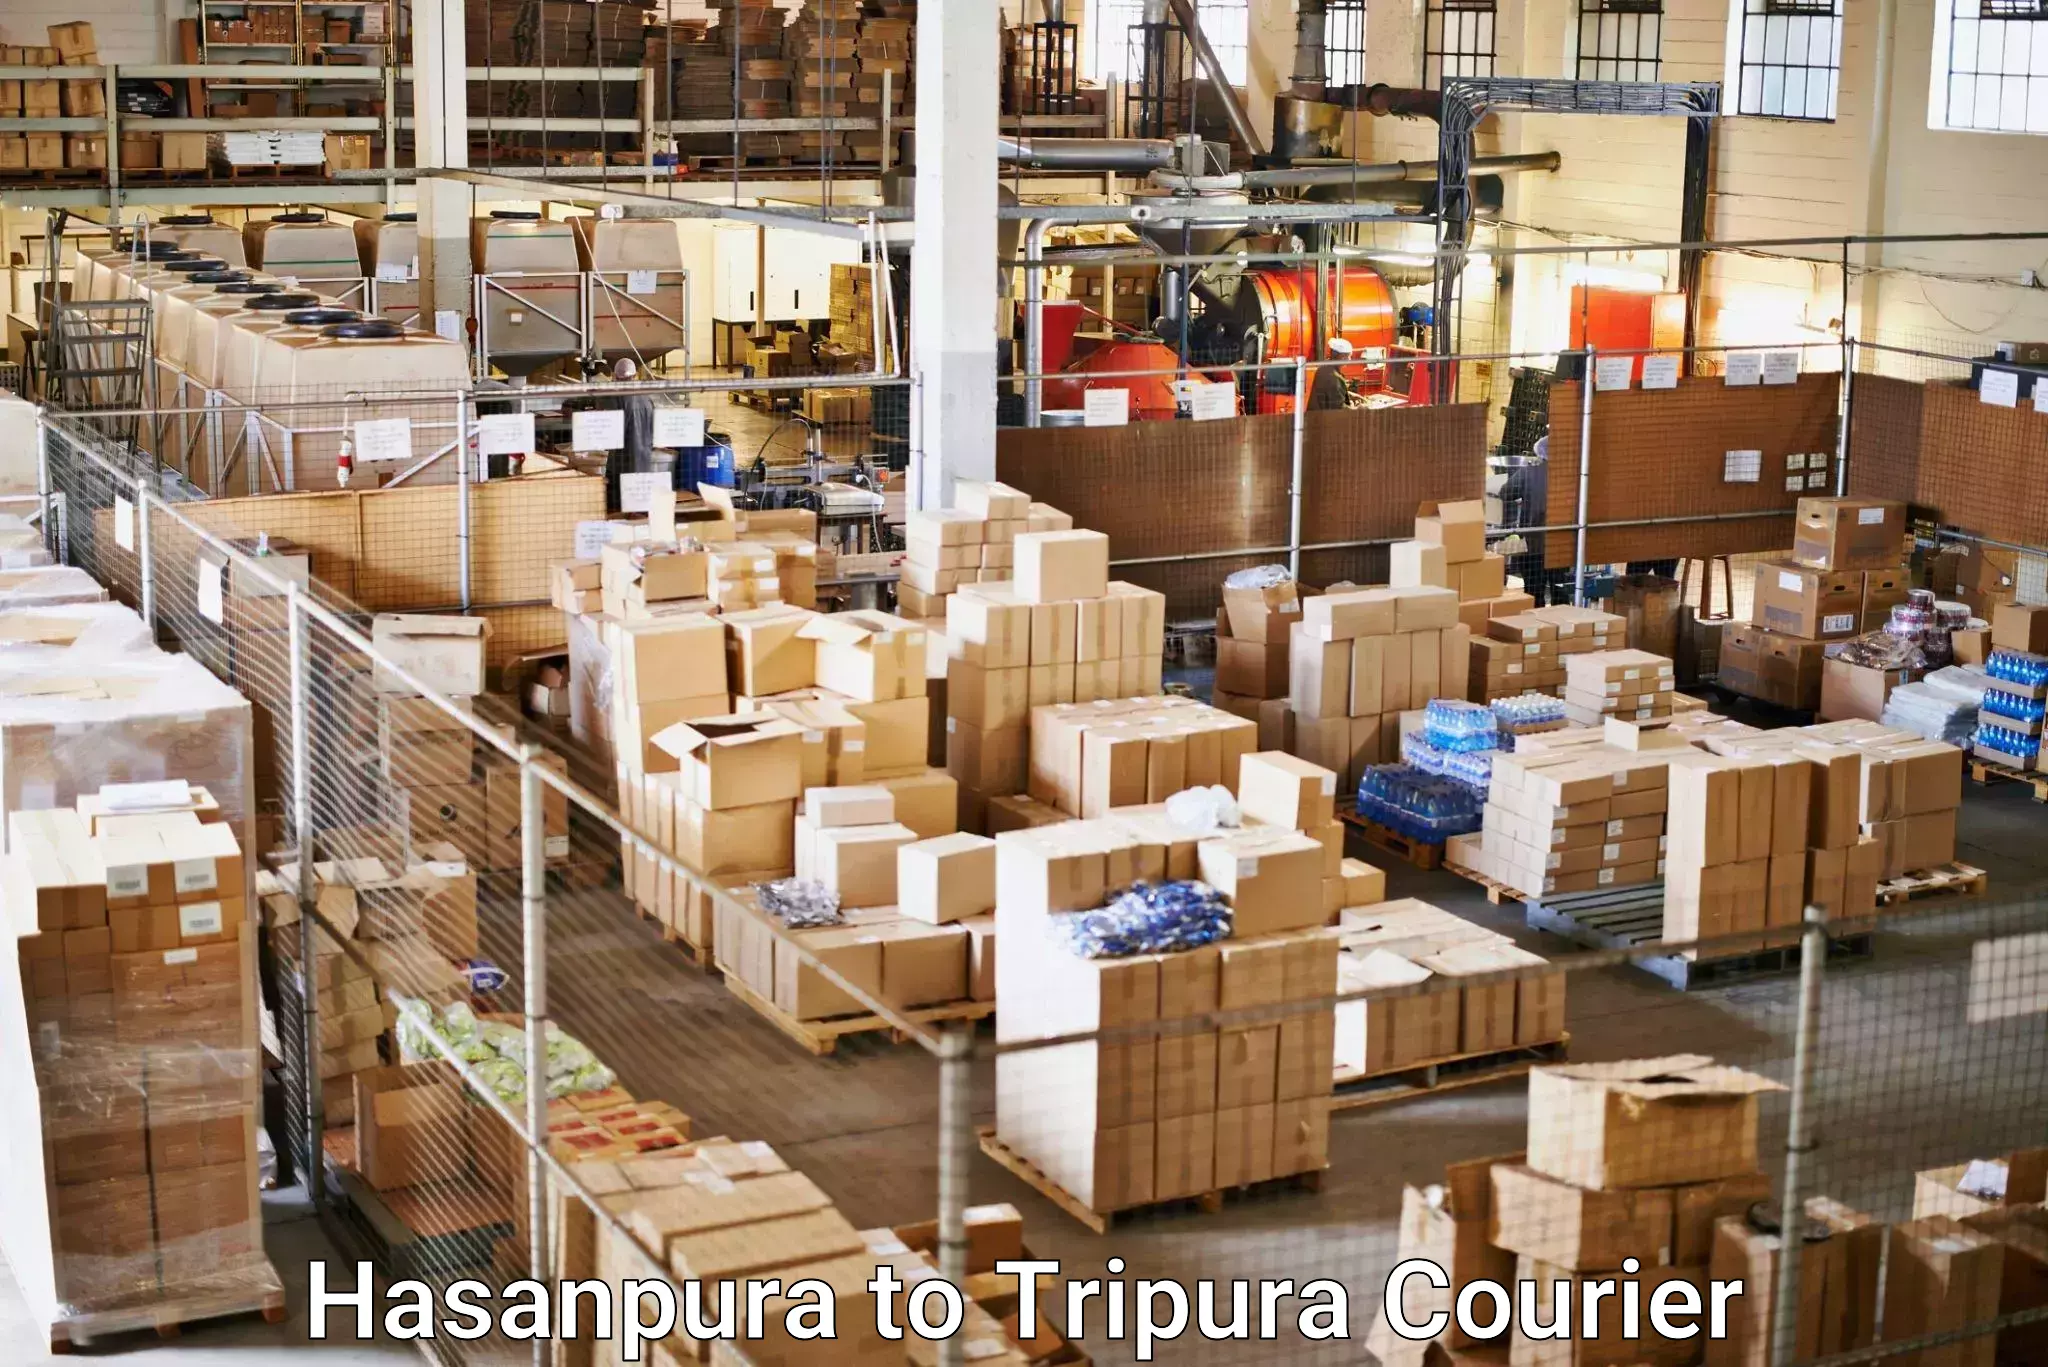 Affordable parcel service Hasanpura to Agartala